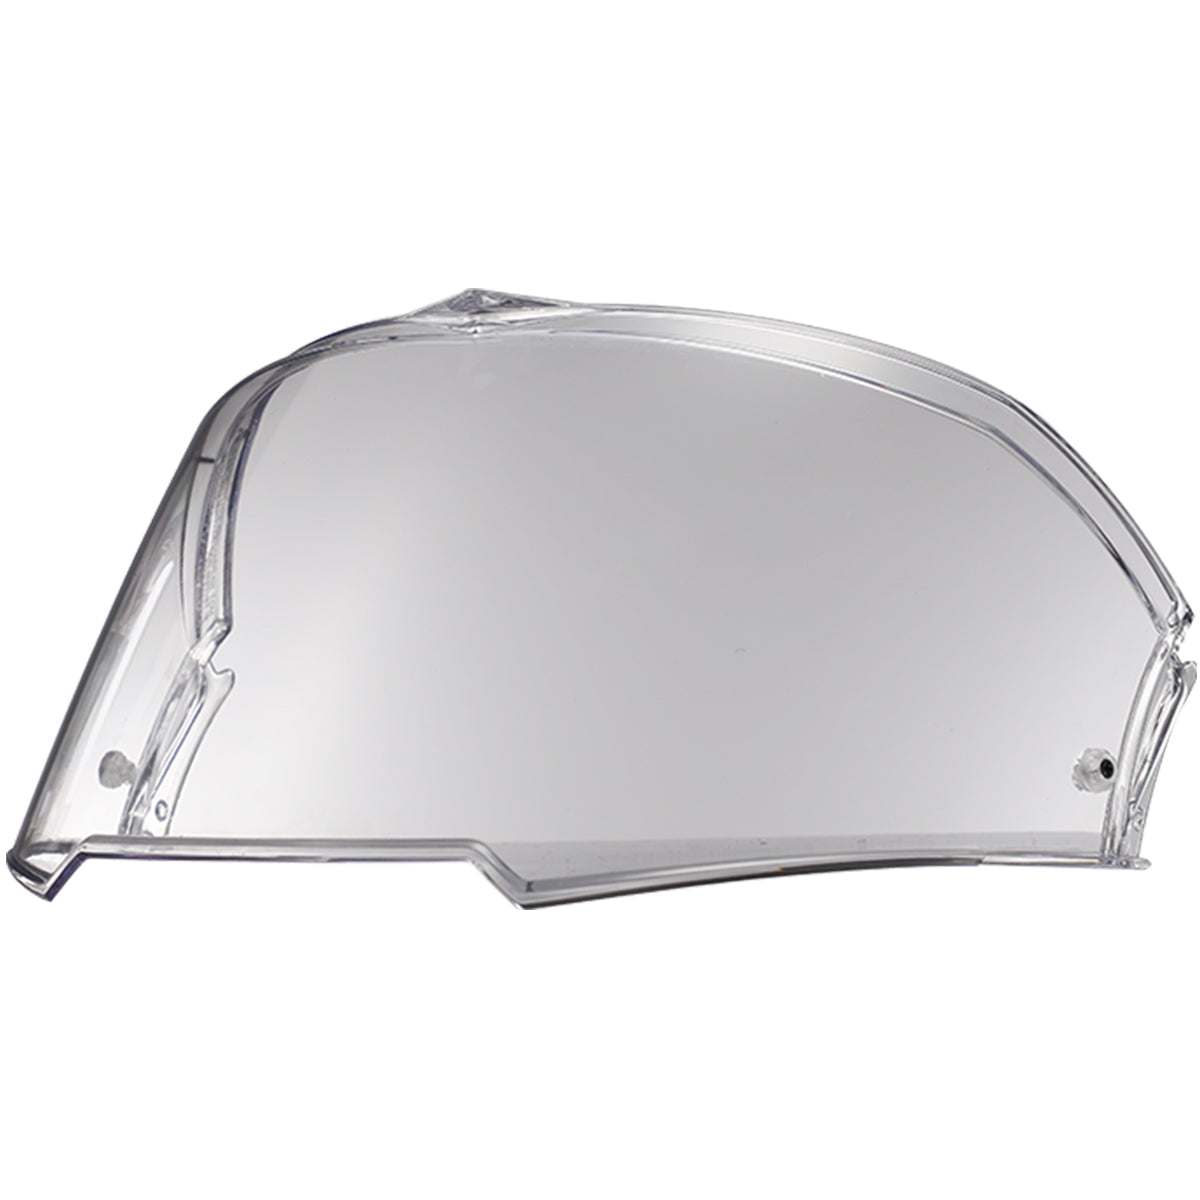 LS2 Valiant II Outer Face Shield Helmet Accessories-03-715-1